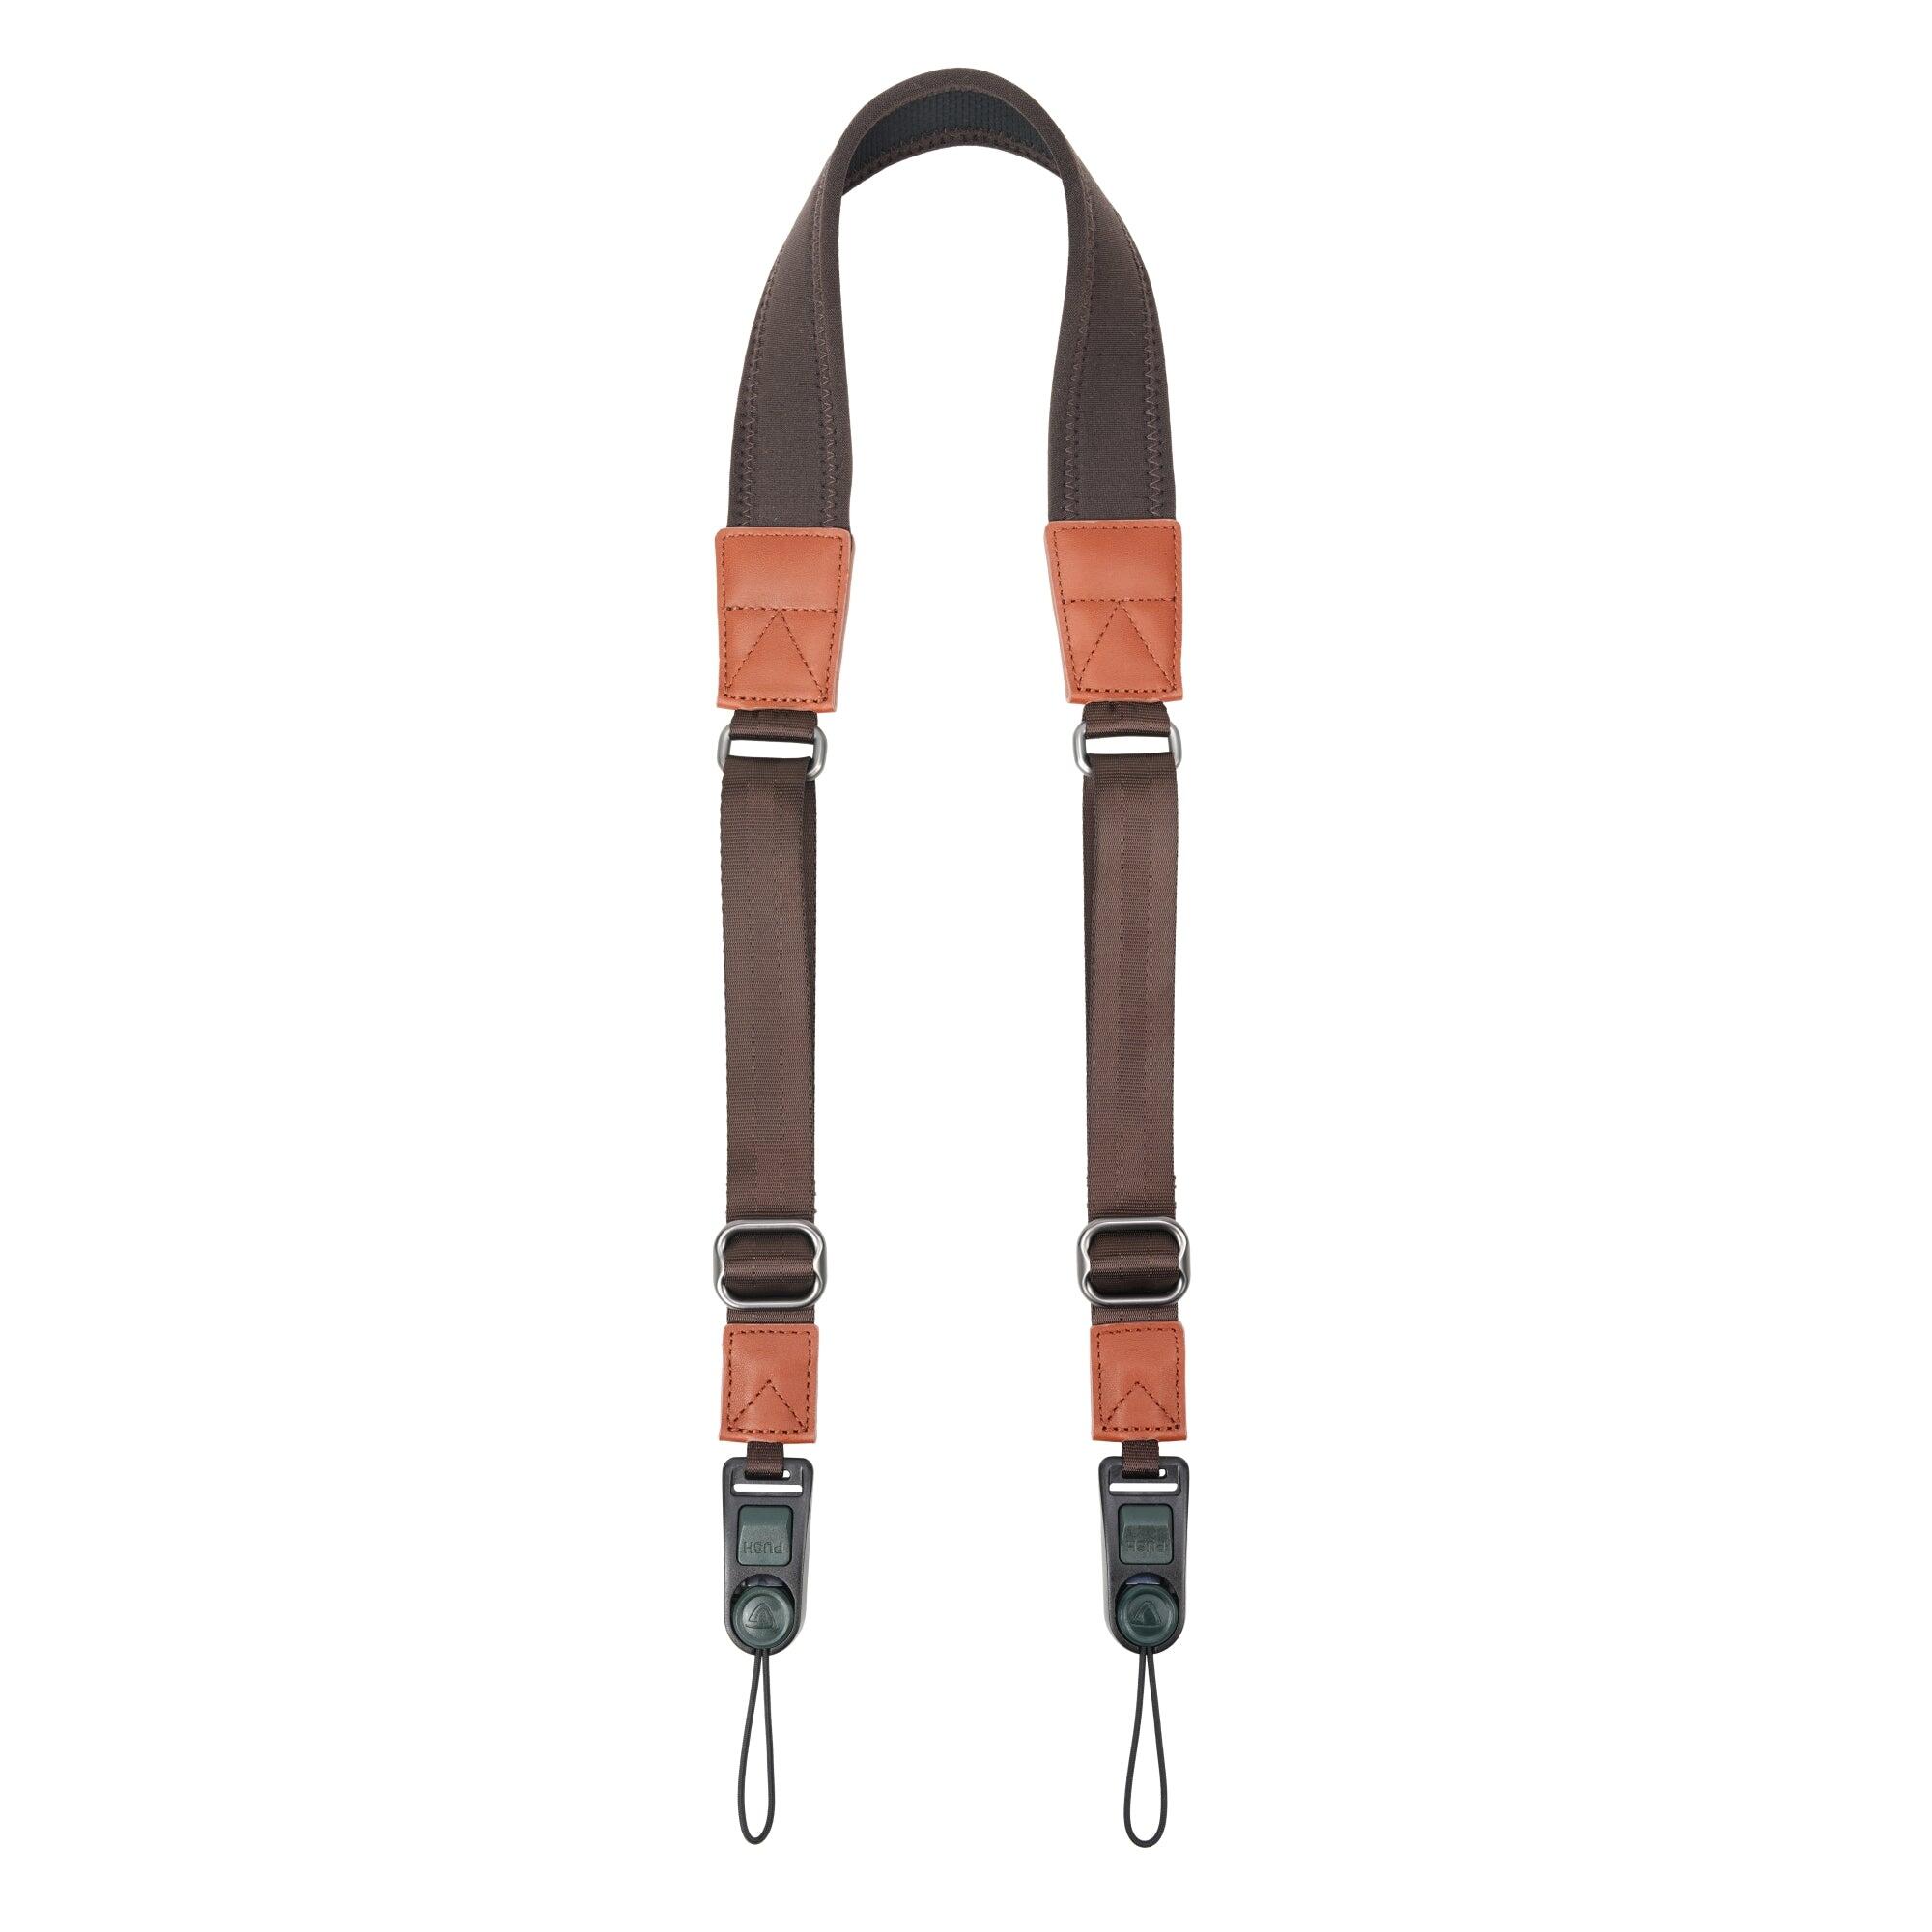 VEO Optic Guard NS Neck Strap - Brown 1/3